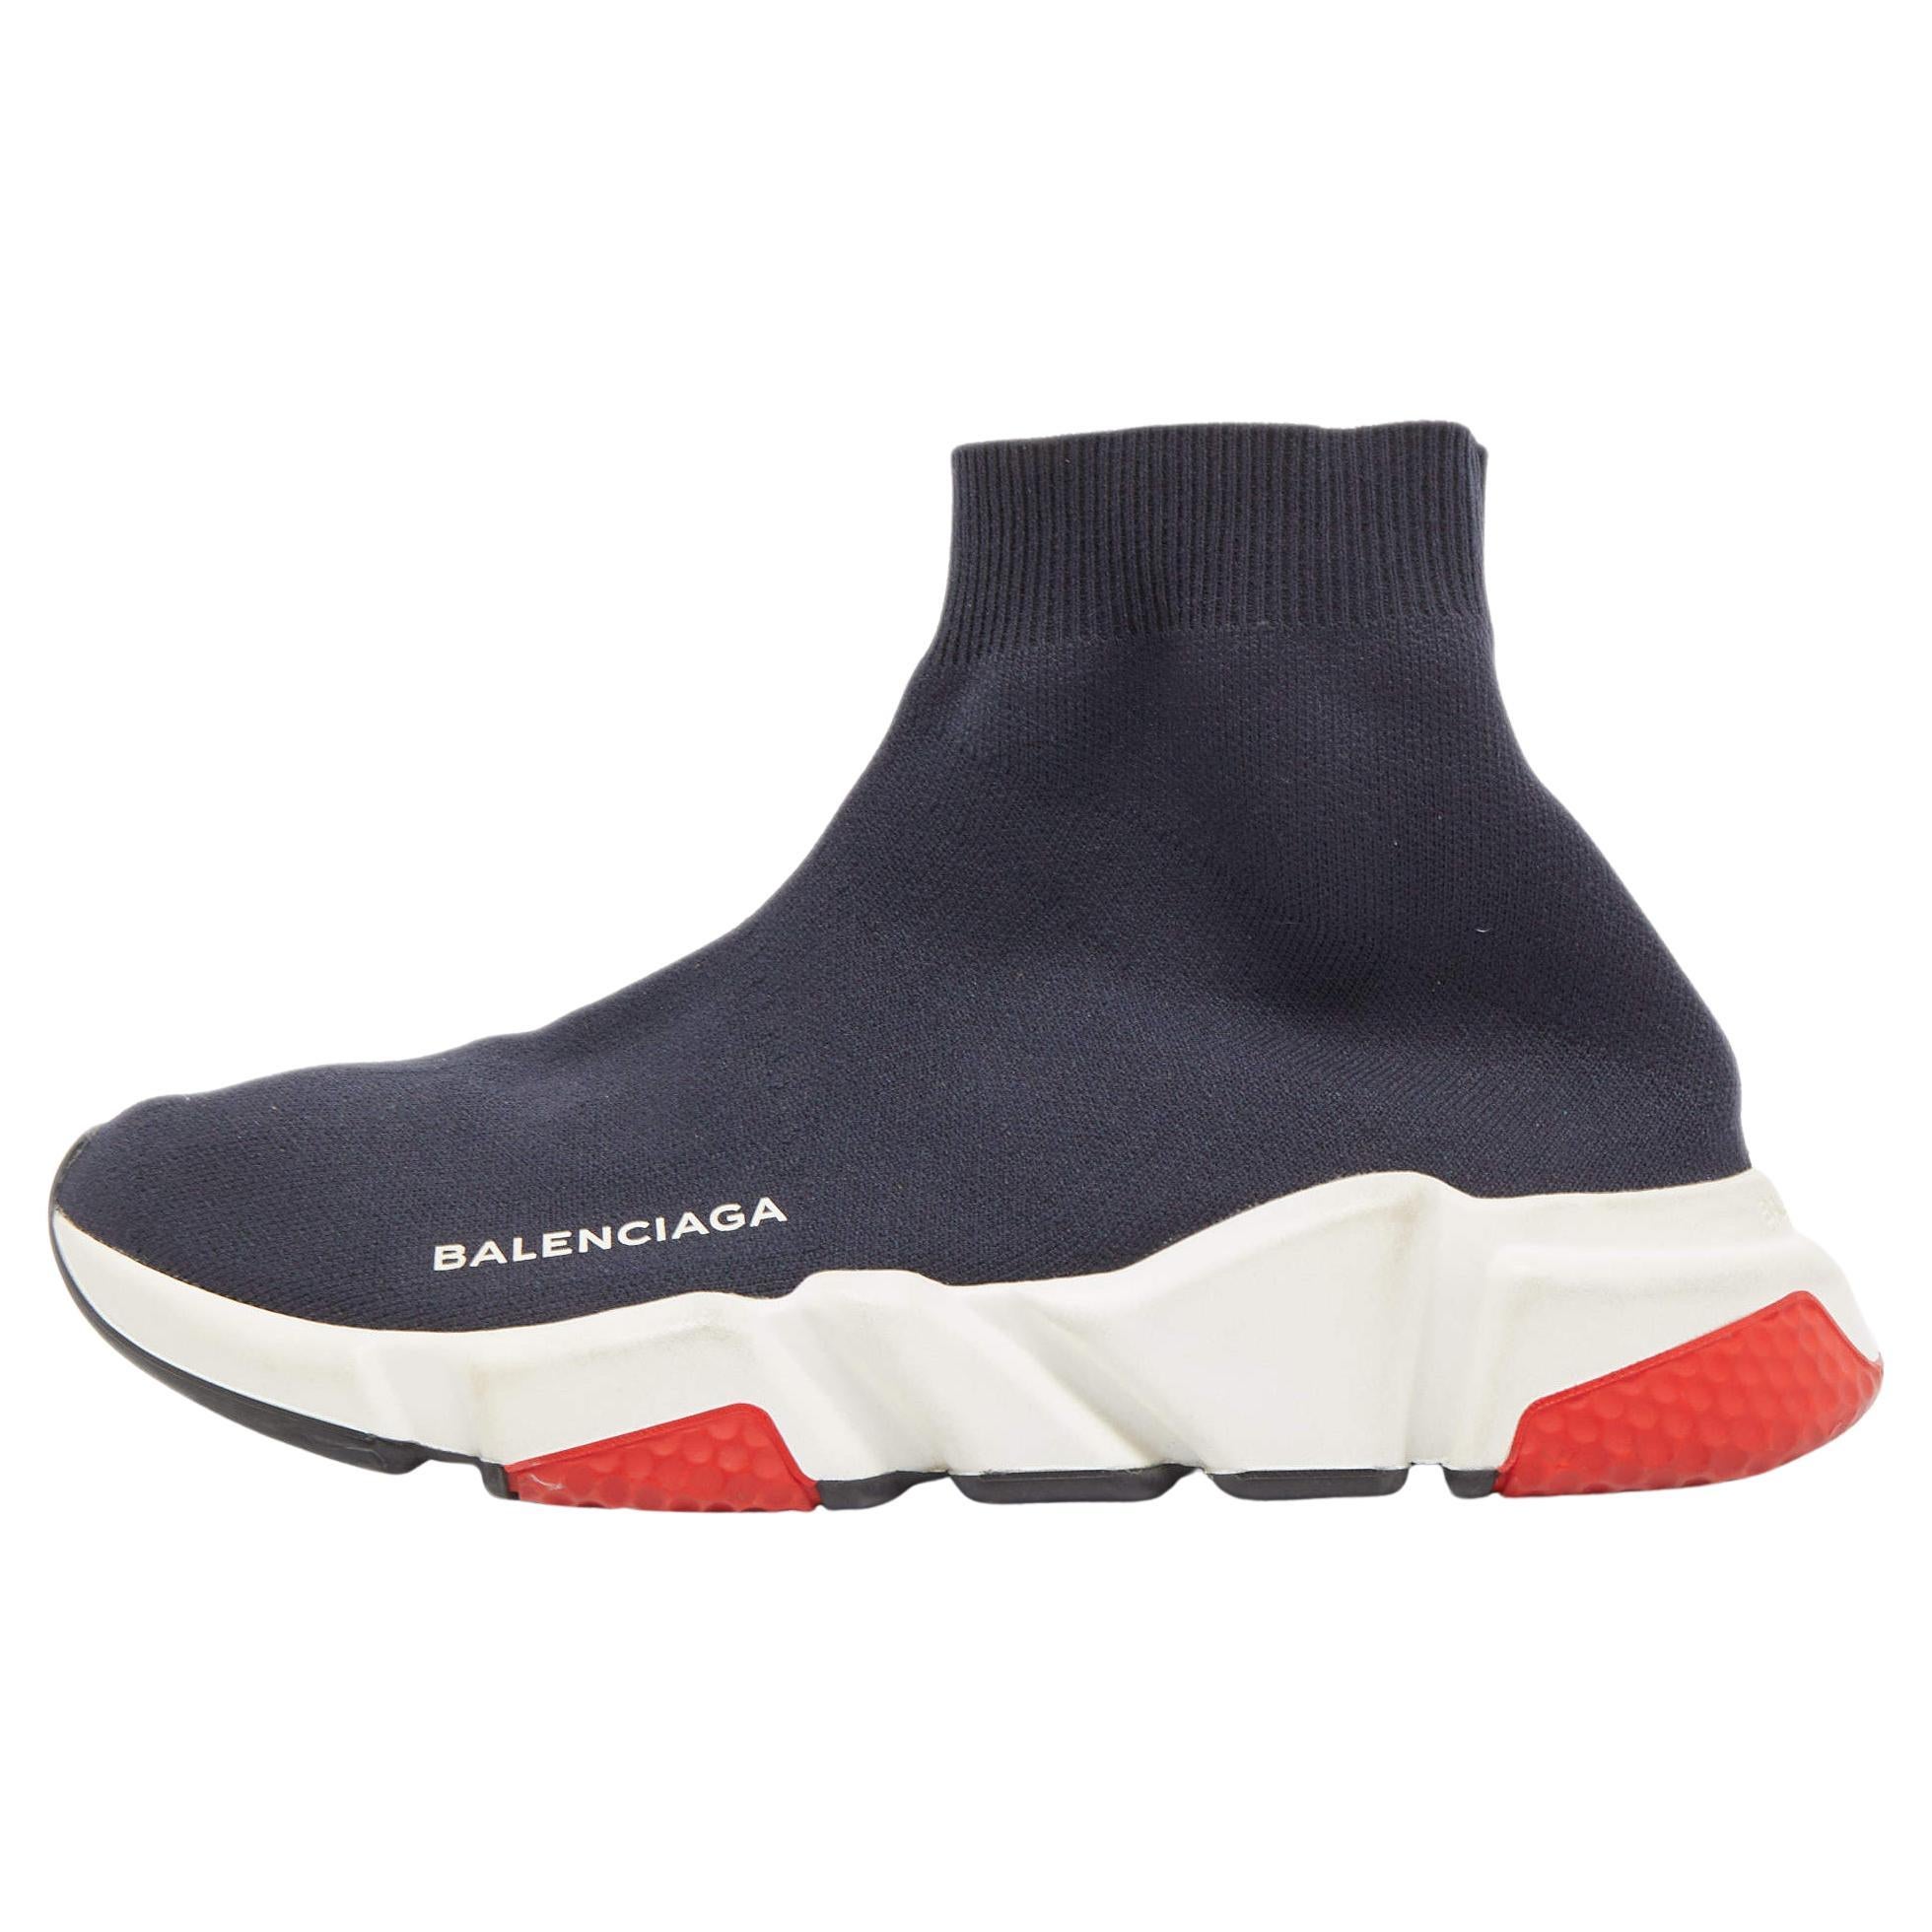 Balenciaga Navy Blue Knit Fabric Speed Trainer Sneakers Size 38